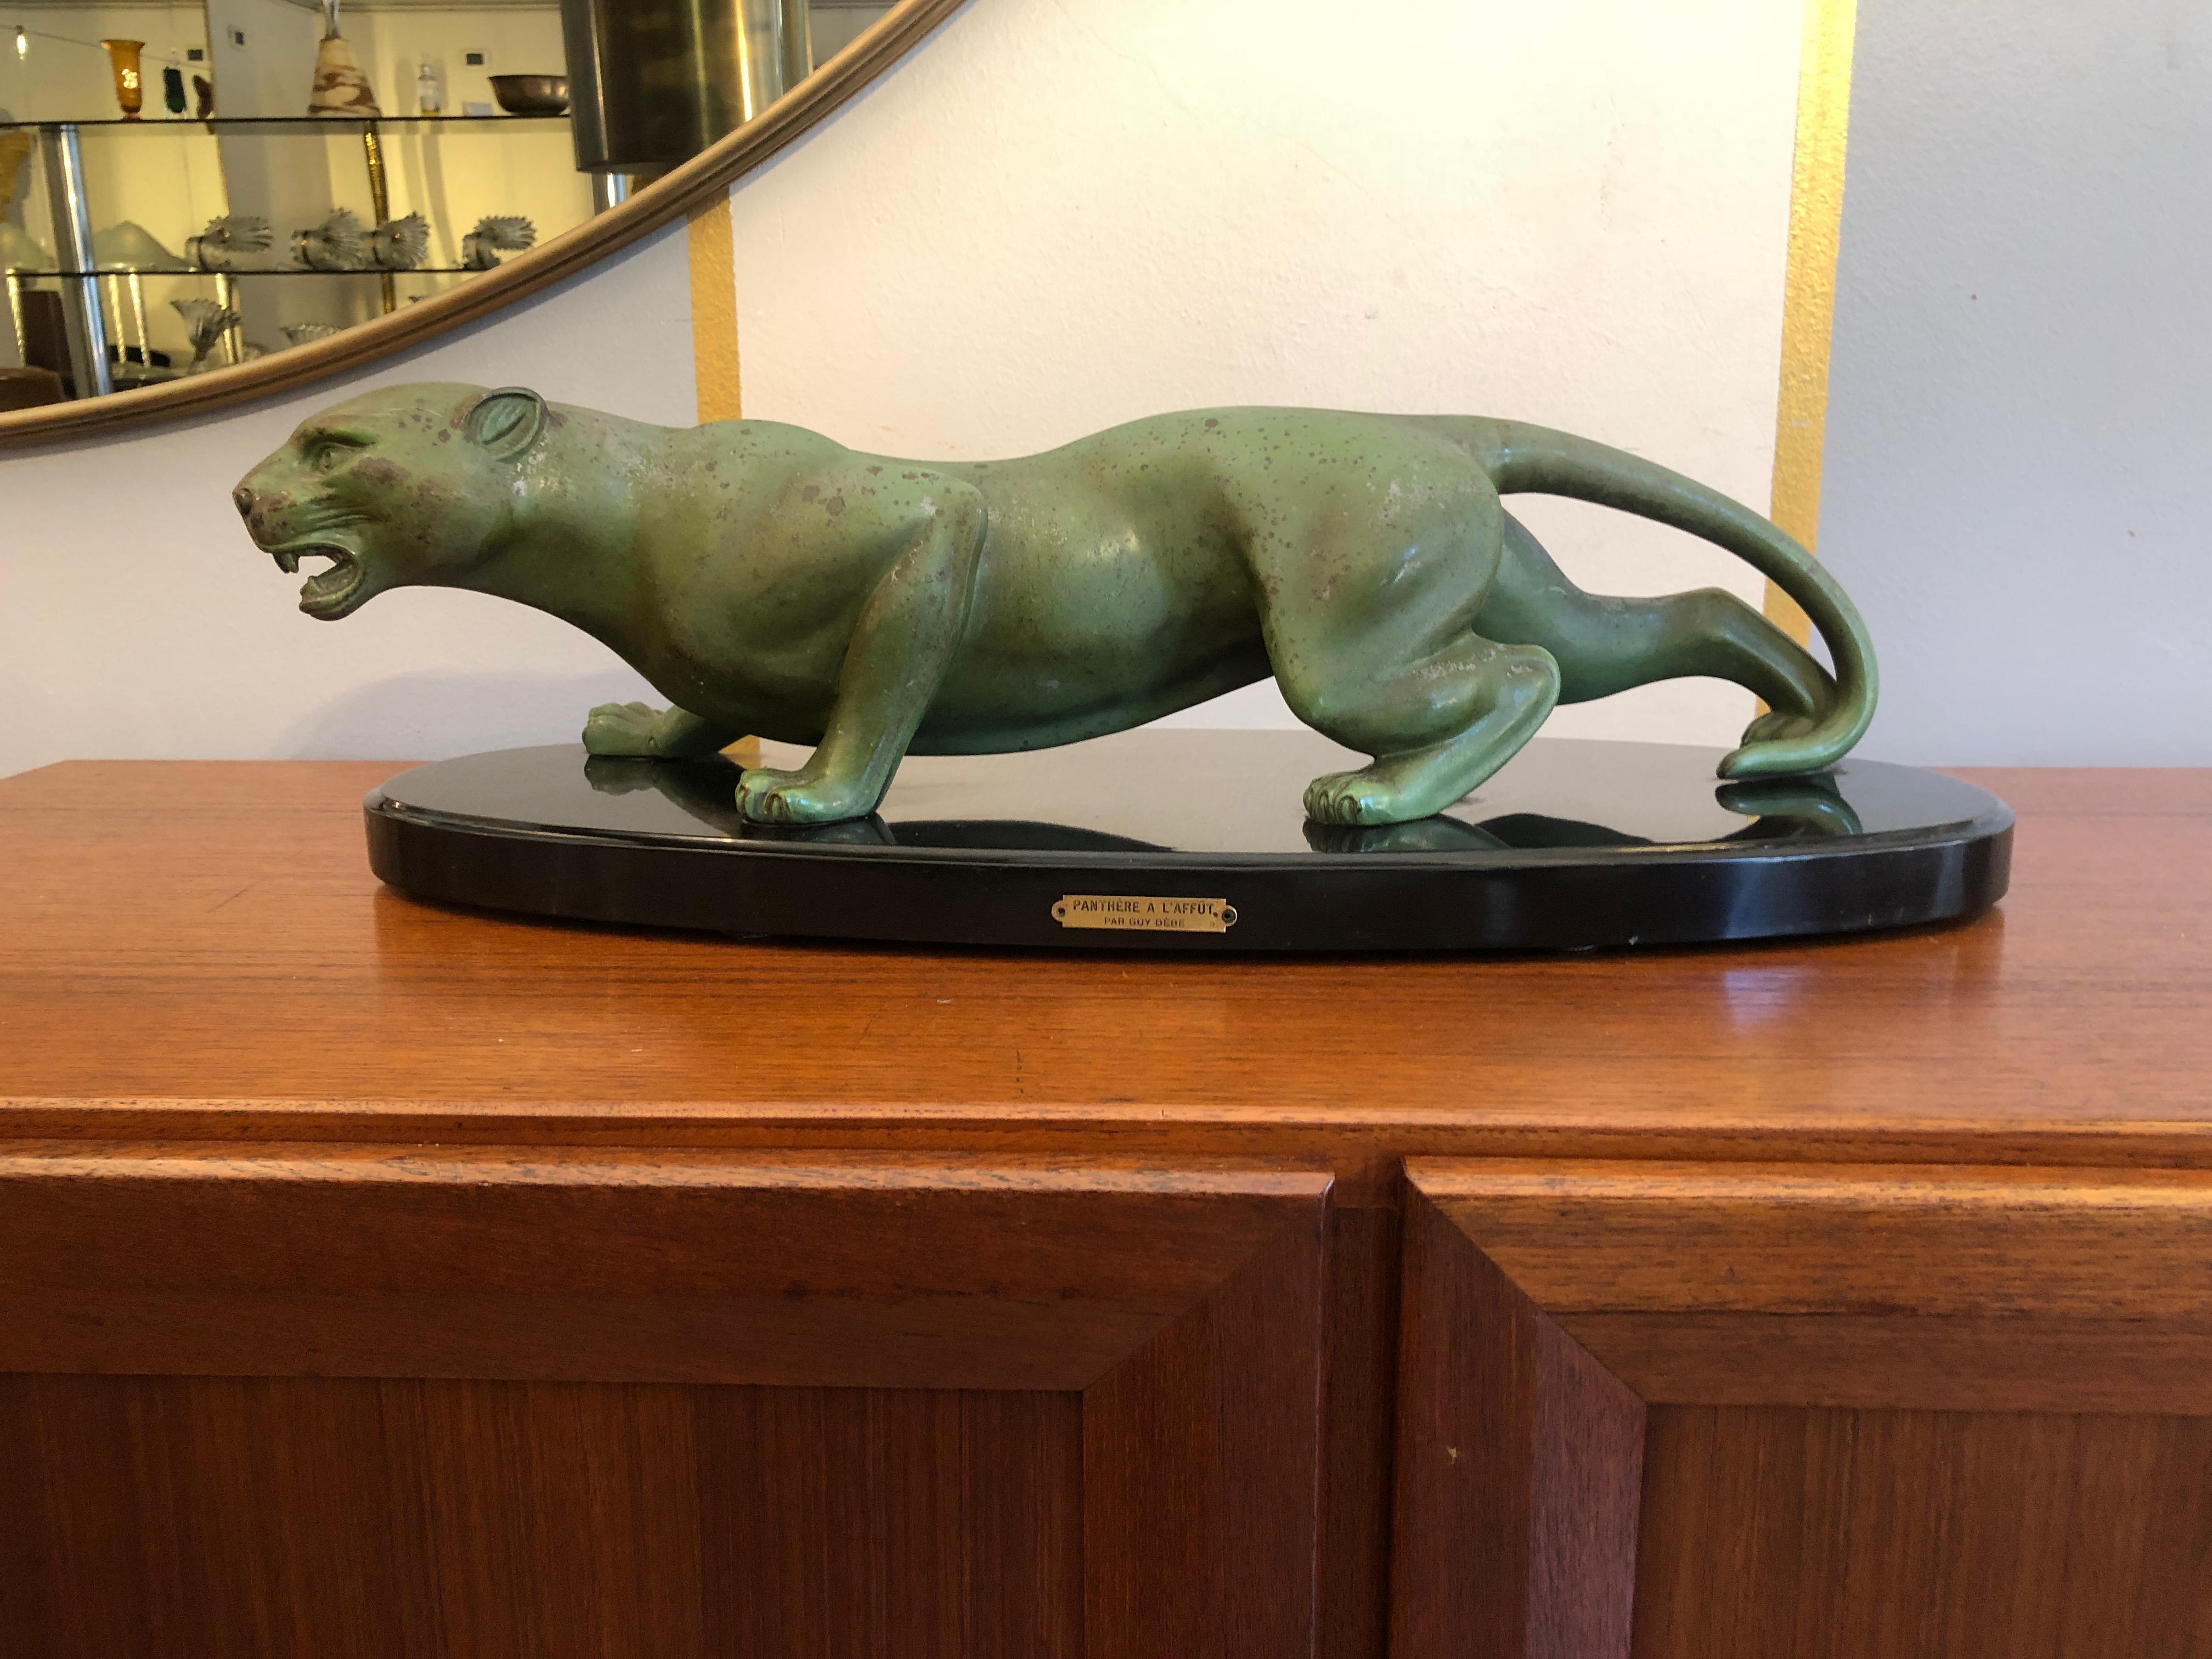 Art Deco animal bronze sculpture panther by Guy Debe on black oval marble base.

Art Deco sculpture representing a Panther during a hunting moment. This sculpture is made by Art Deco sculptor Guy Debe, an artist active during the early 20th